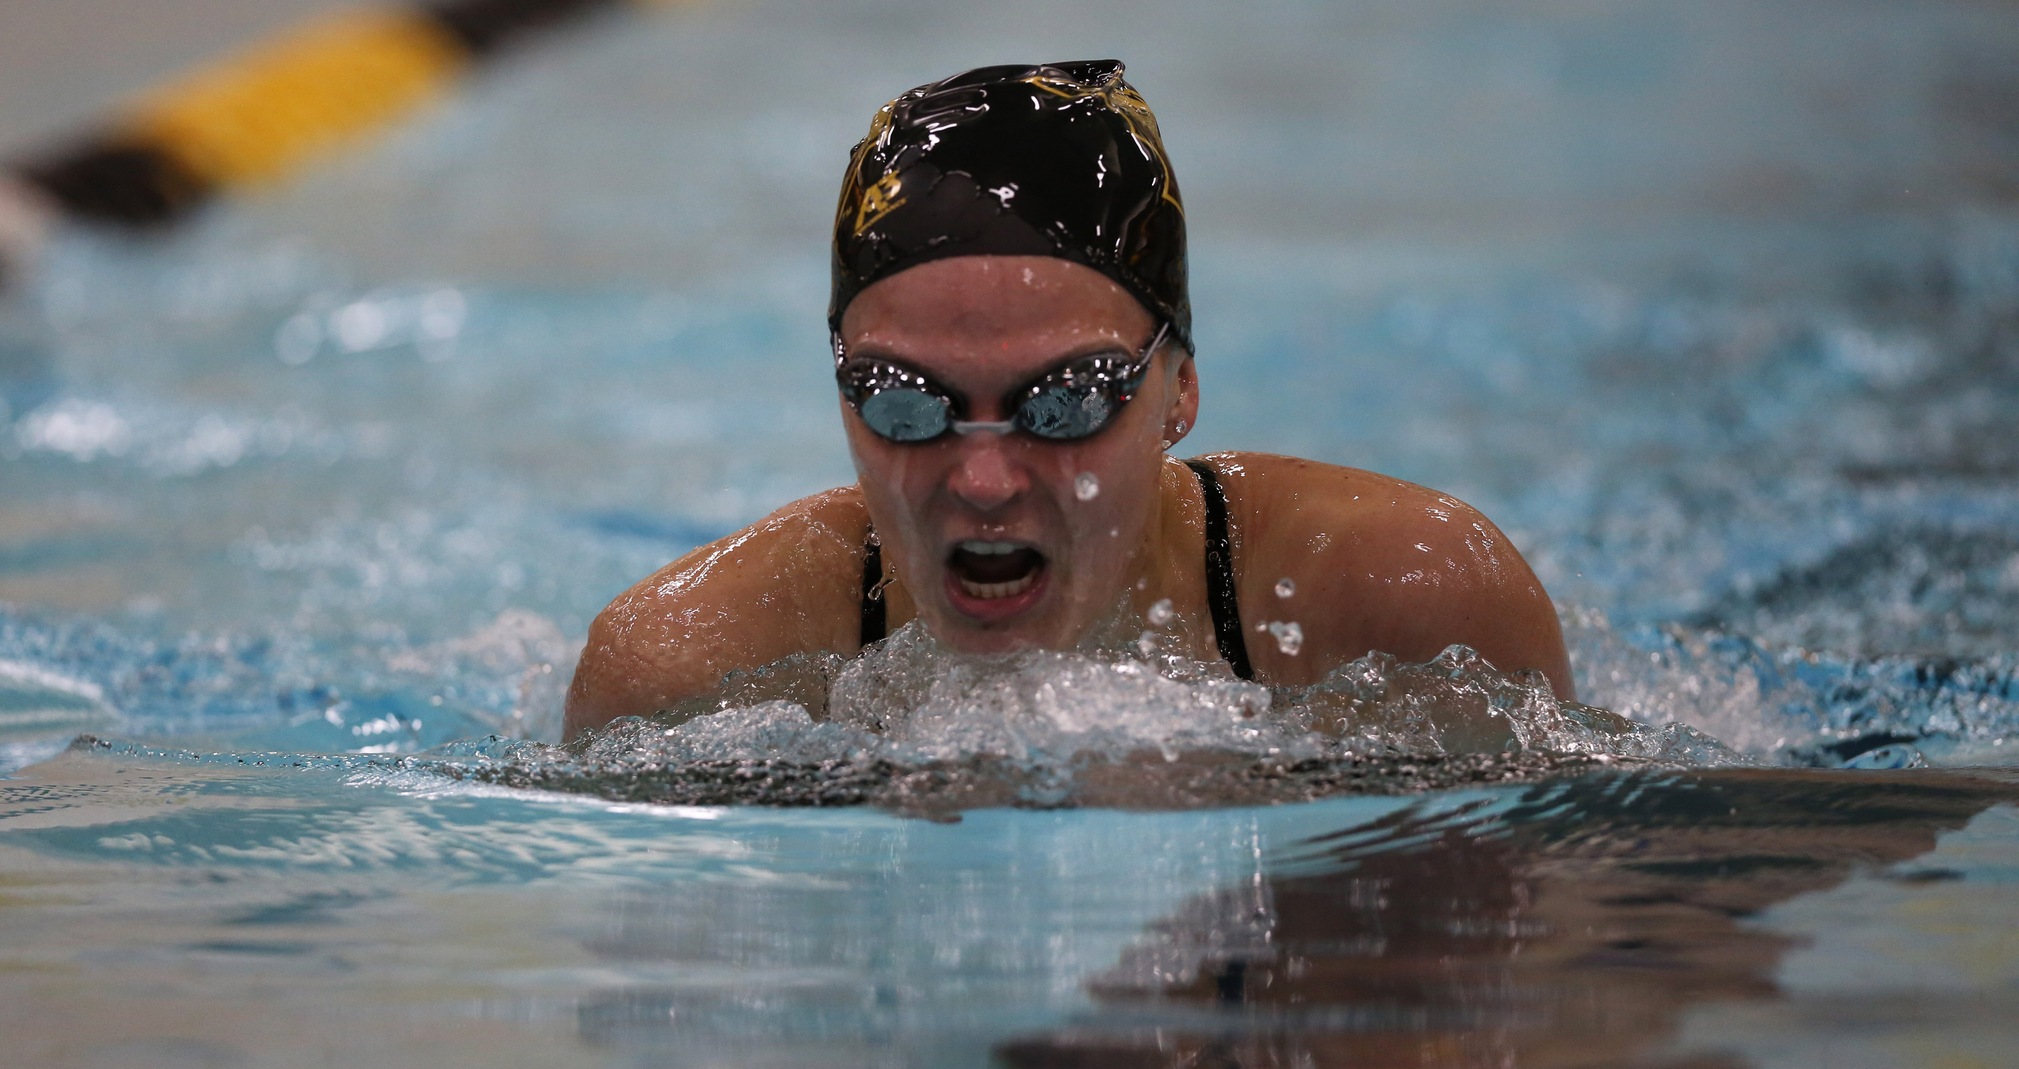 Sydney Challoner finished second in the 200-yard butterfly and third in both the 100-yard butterfly and 200-yard individual medley at this year's WIAC Championship.